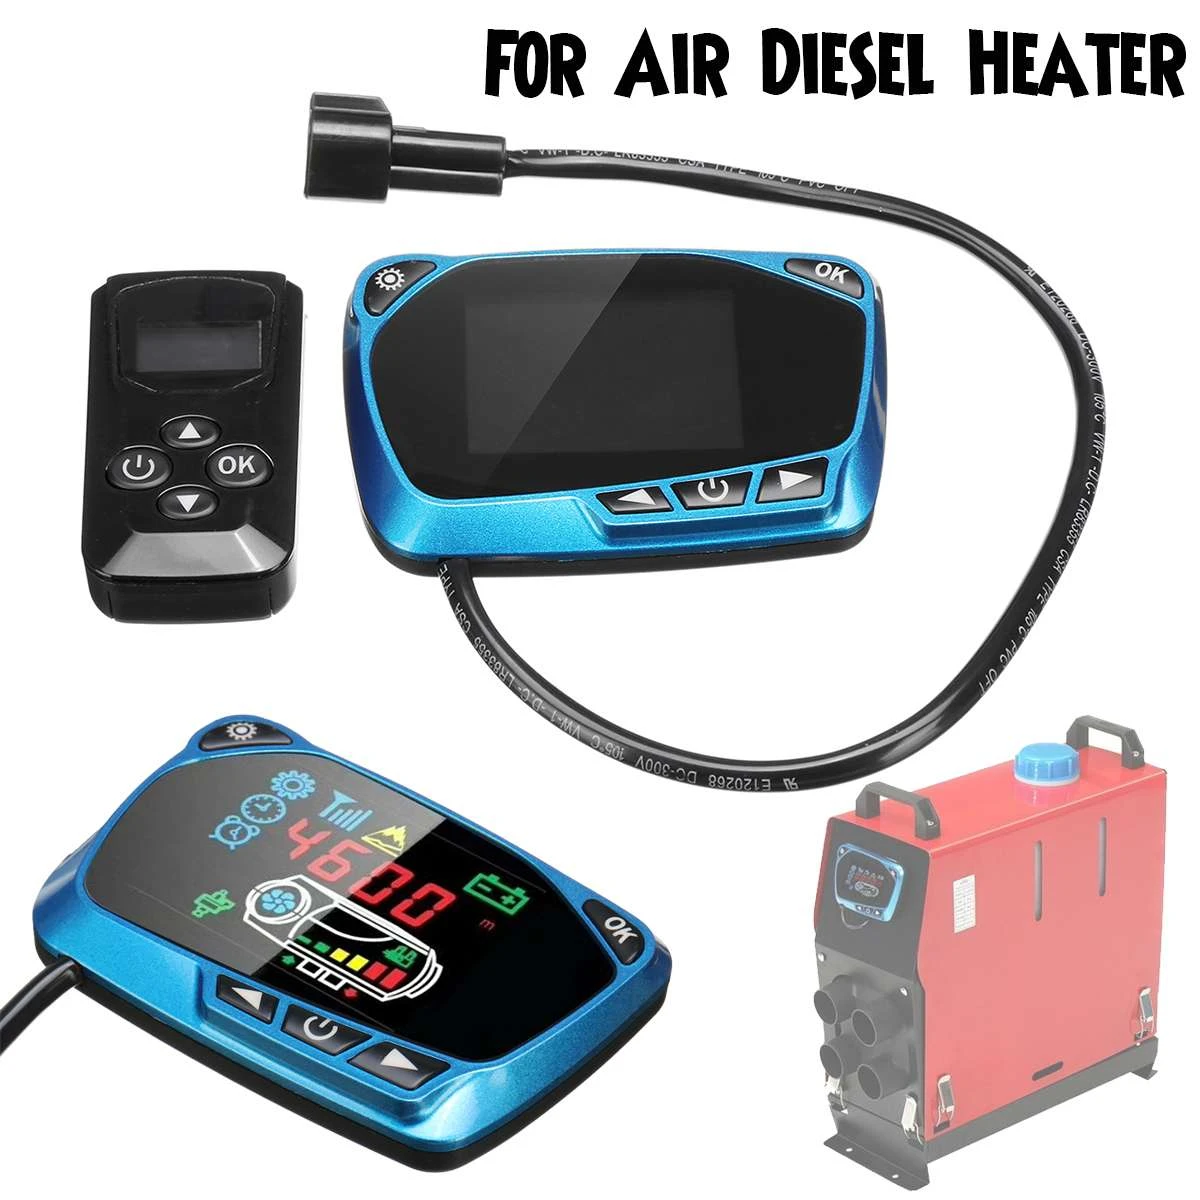 Car Air Diesel Heater 5KW 12V/24V LCD Monitor Controller Switch